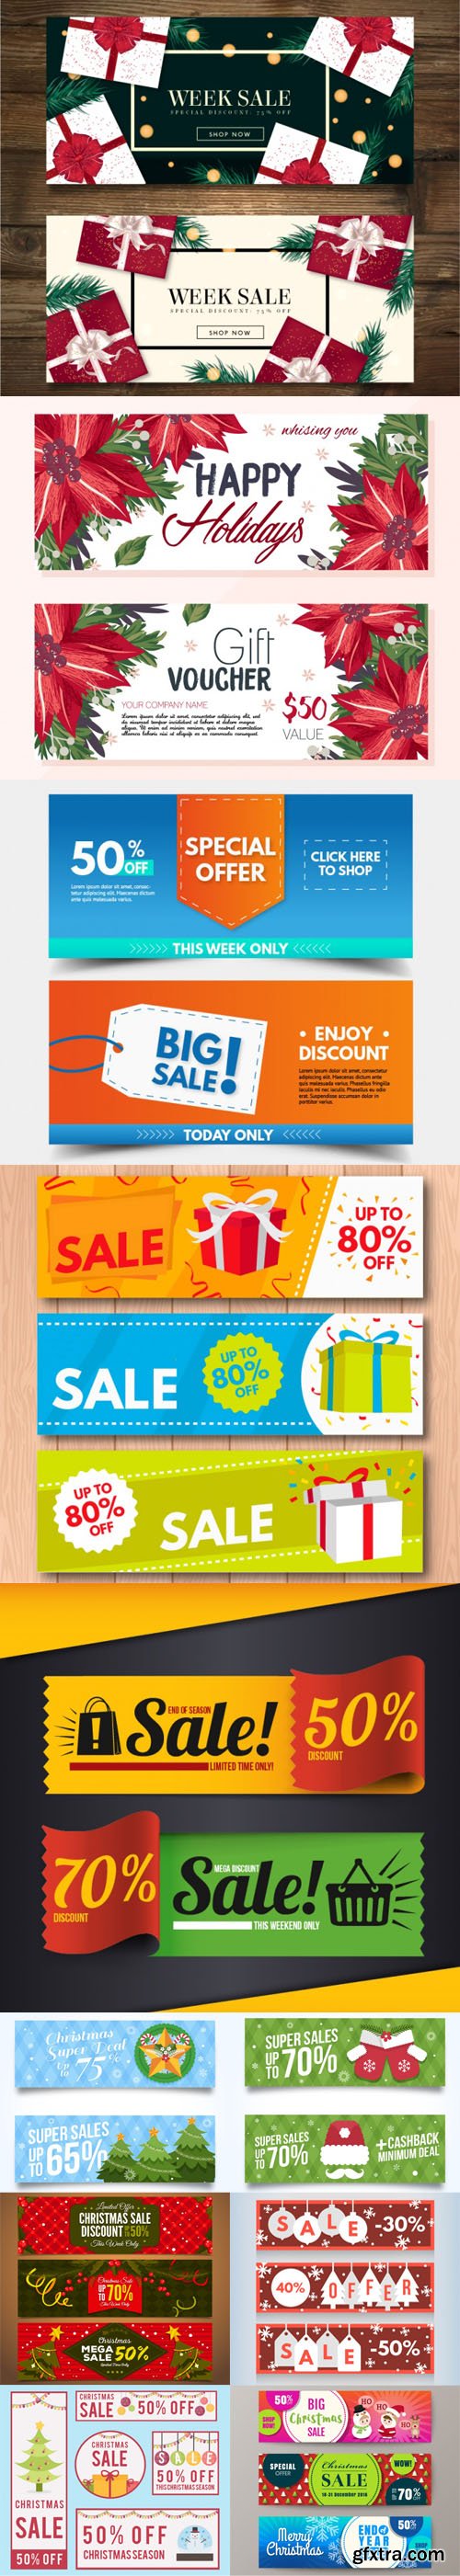 Collection of New Year 2017 Sales Banners Vector [11 Templates]